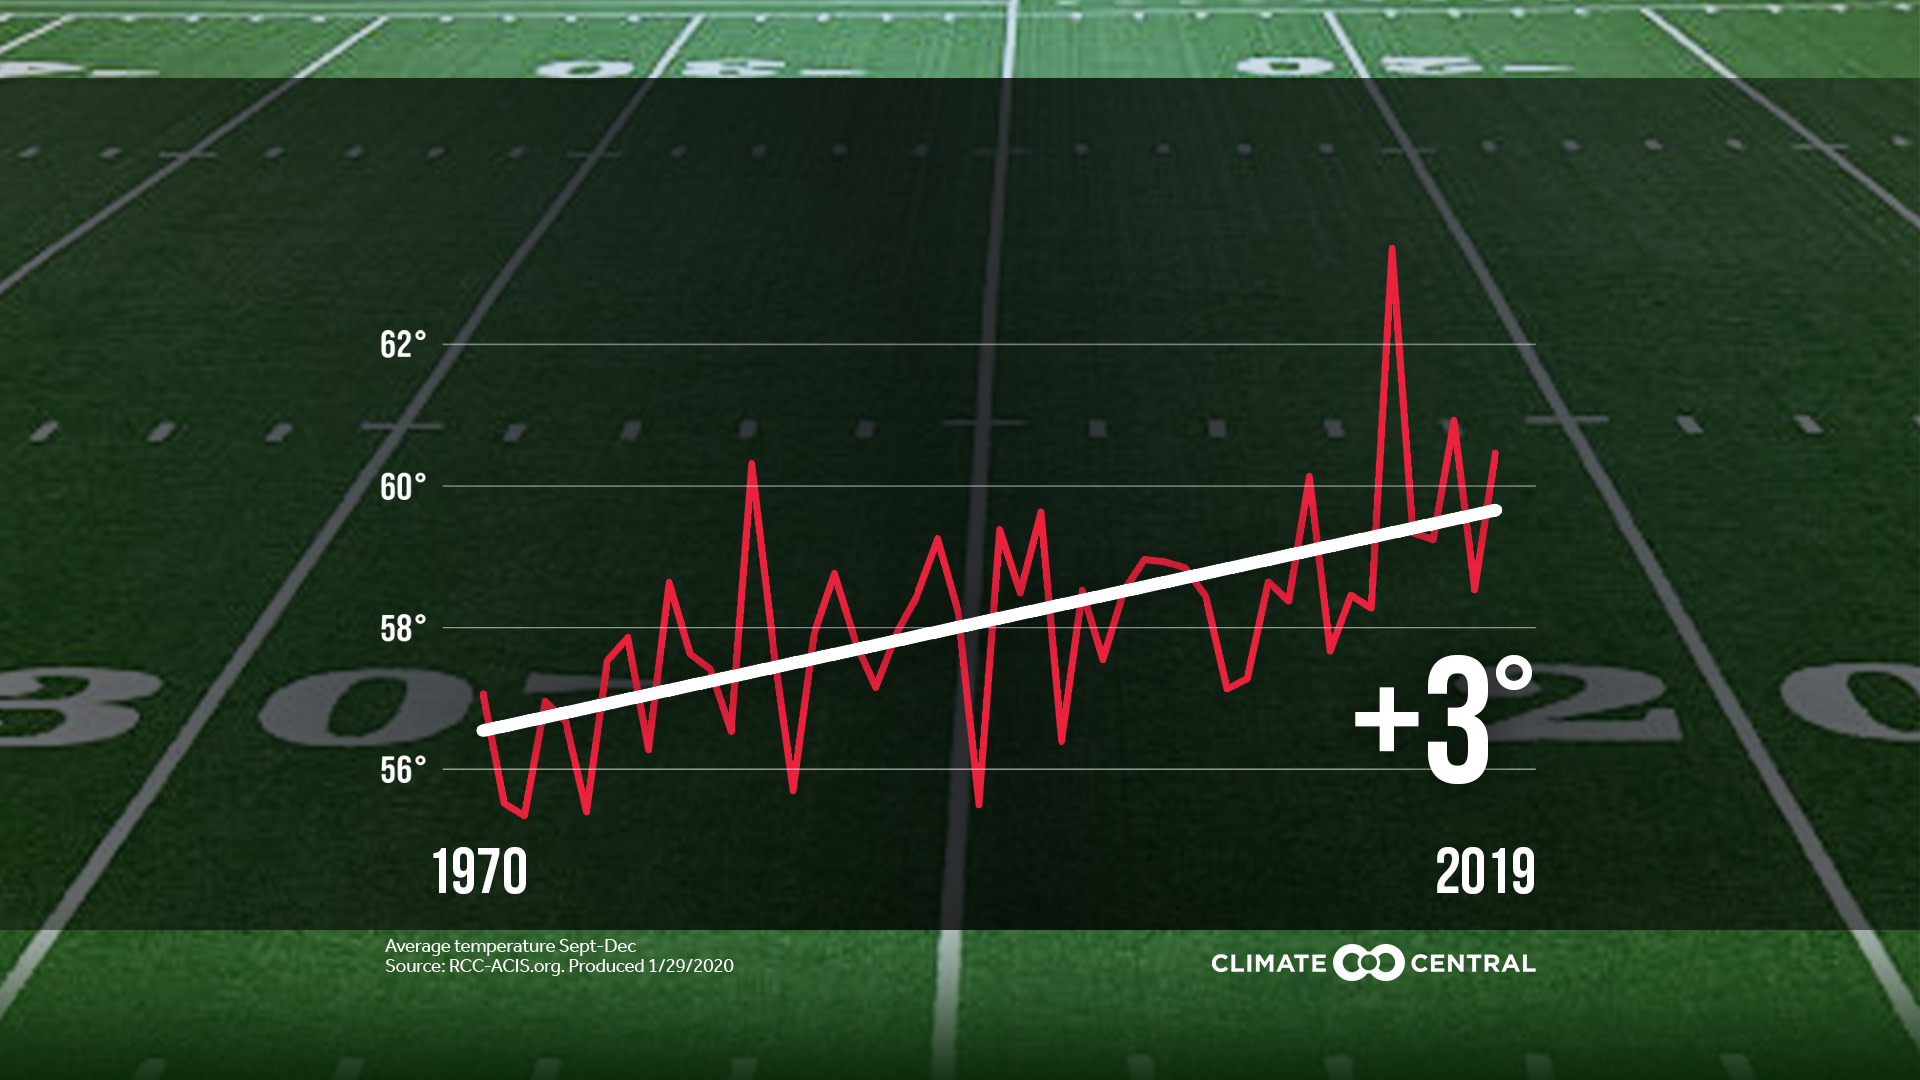 Set 1 - 2020 Superbowl: Sea Level Rise and Warming NFL Cities